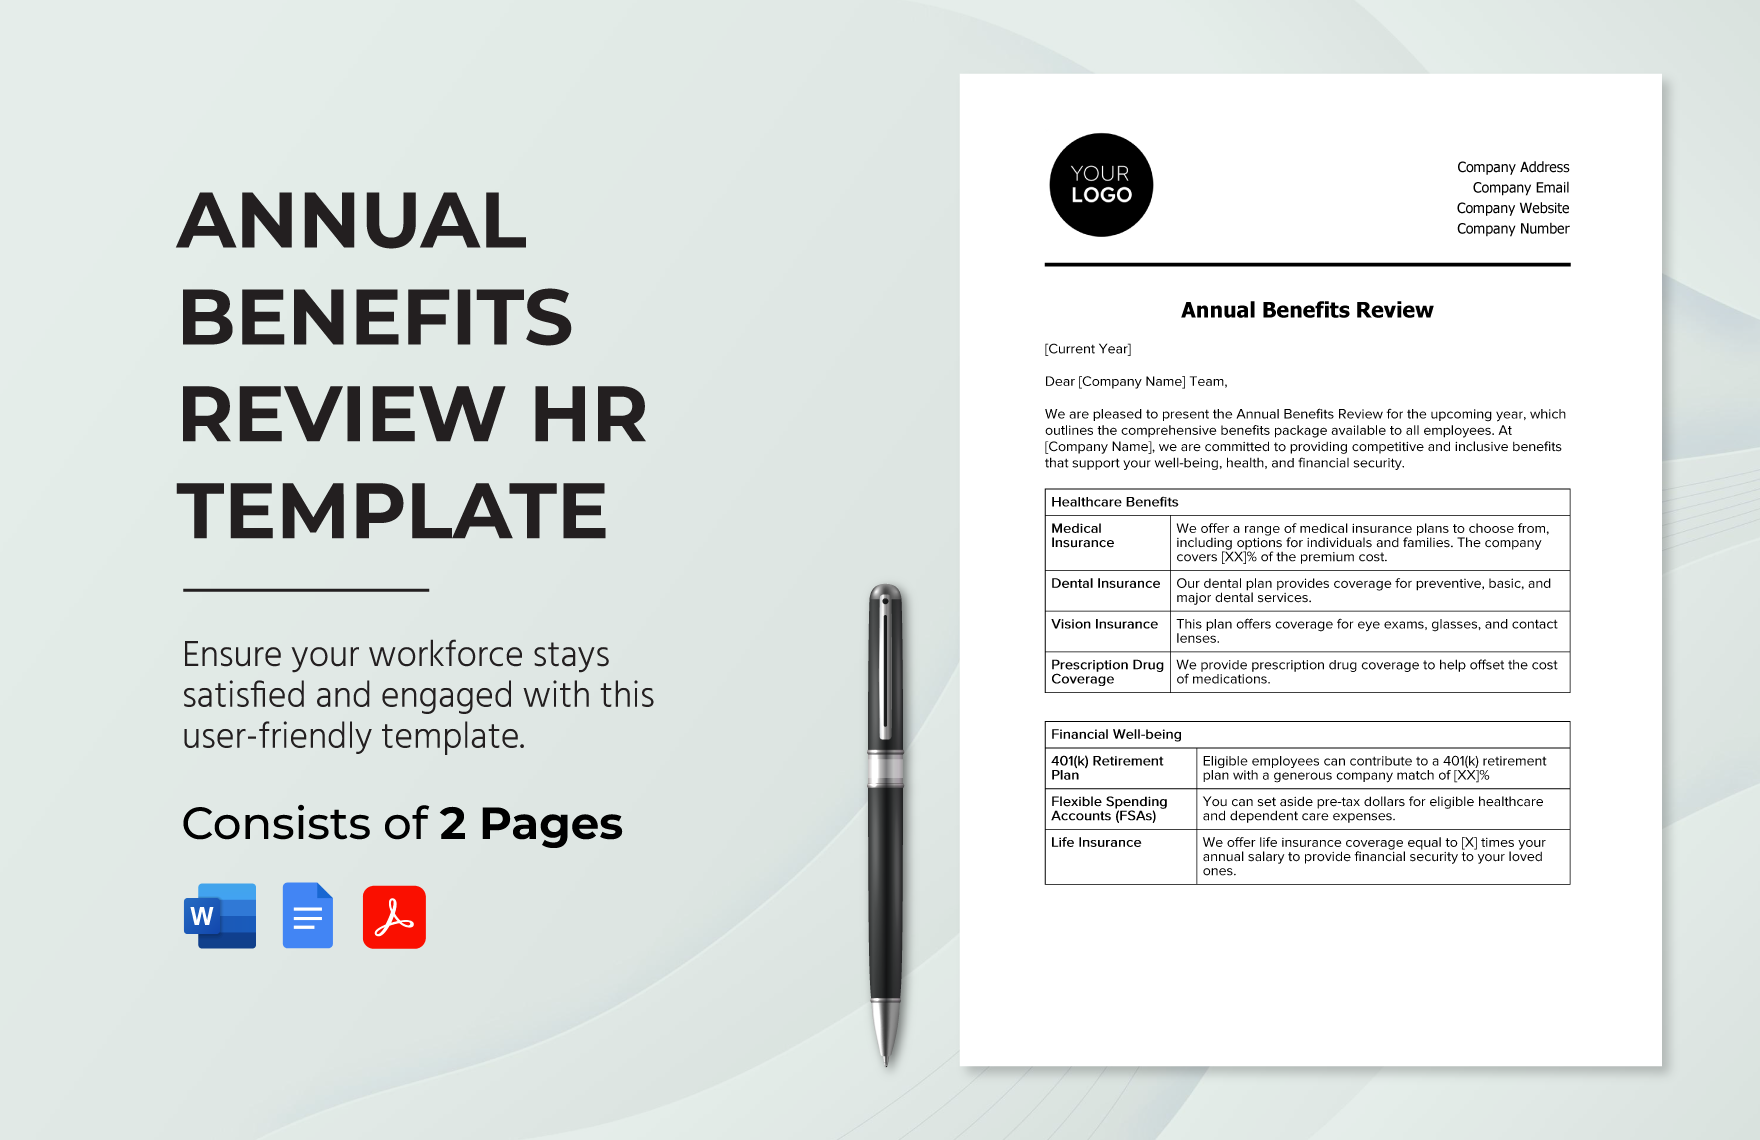 Annual Benefits Review HR Template